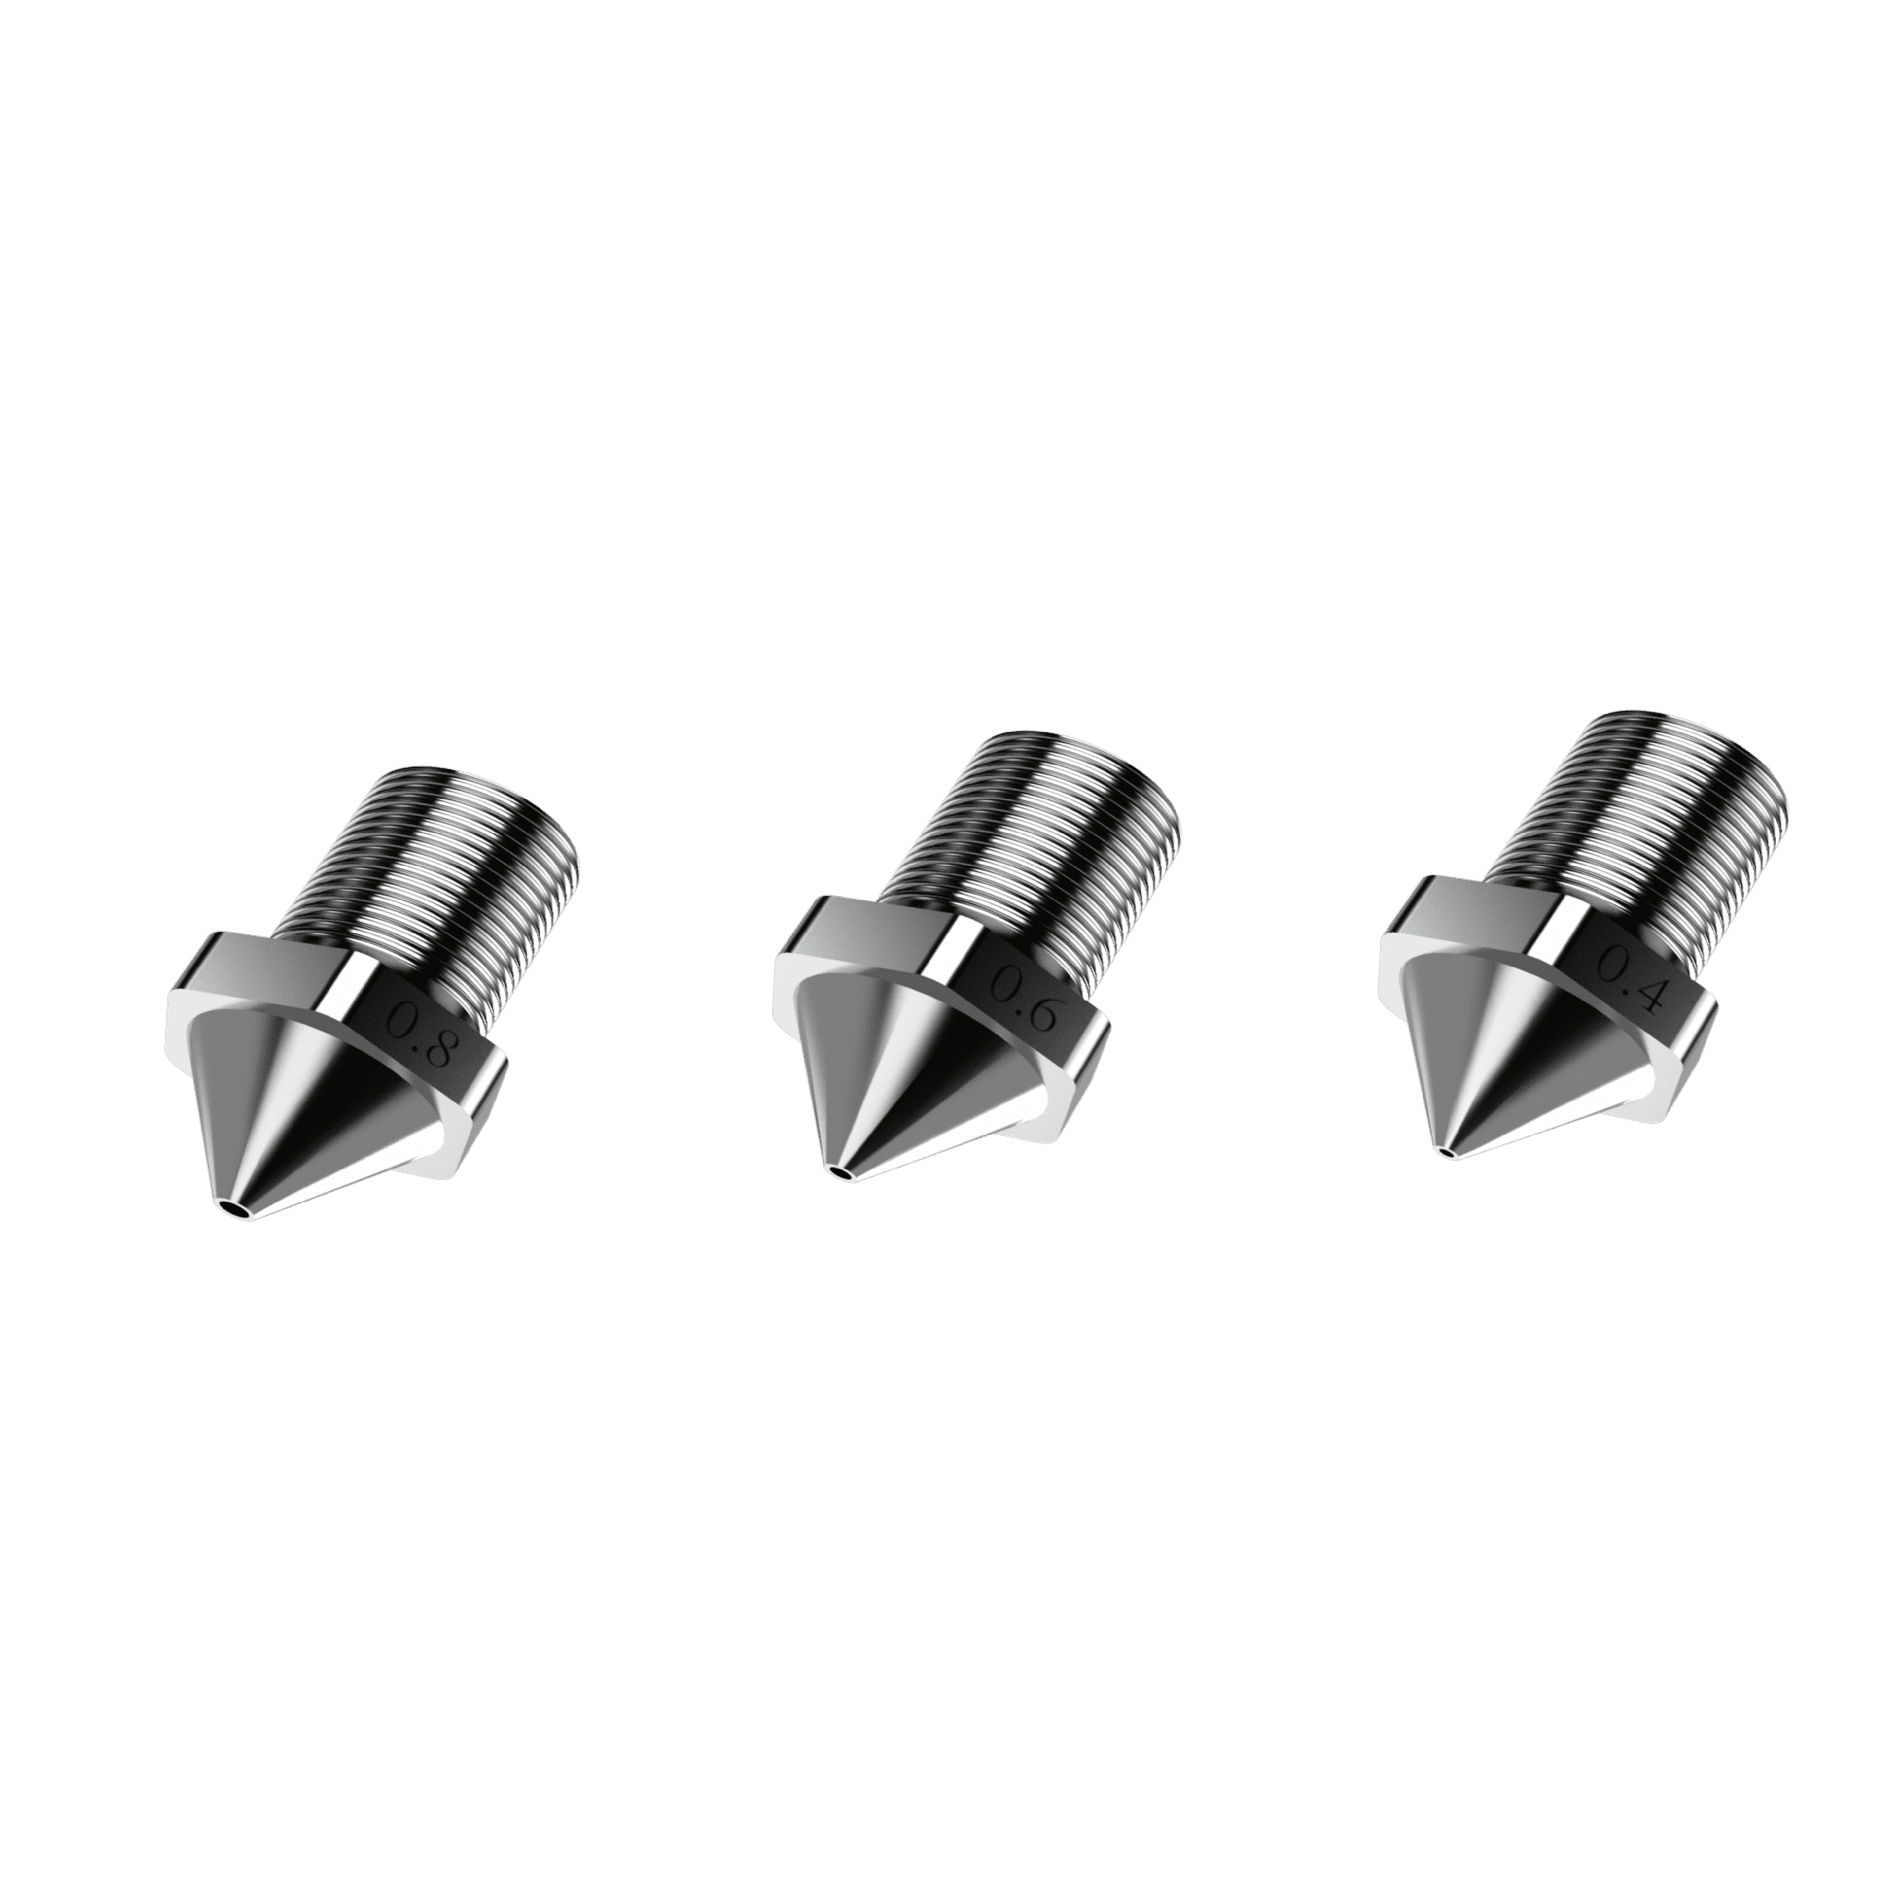 Creator 3 Pro & 4A Stainless Steel Nozzle Kit 0.4/0.6/0.8